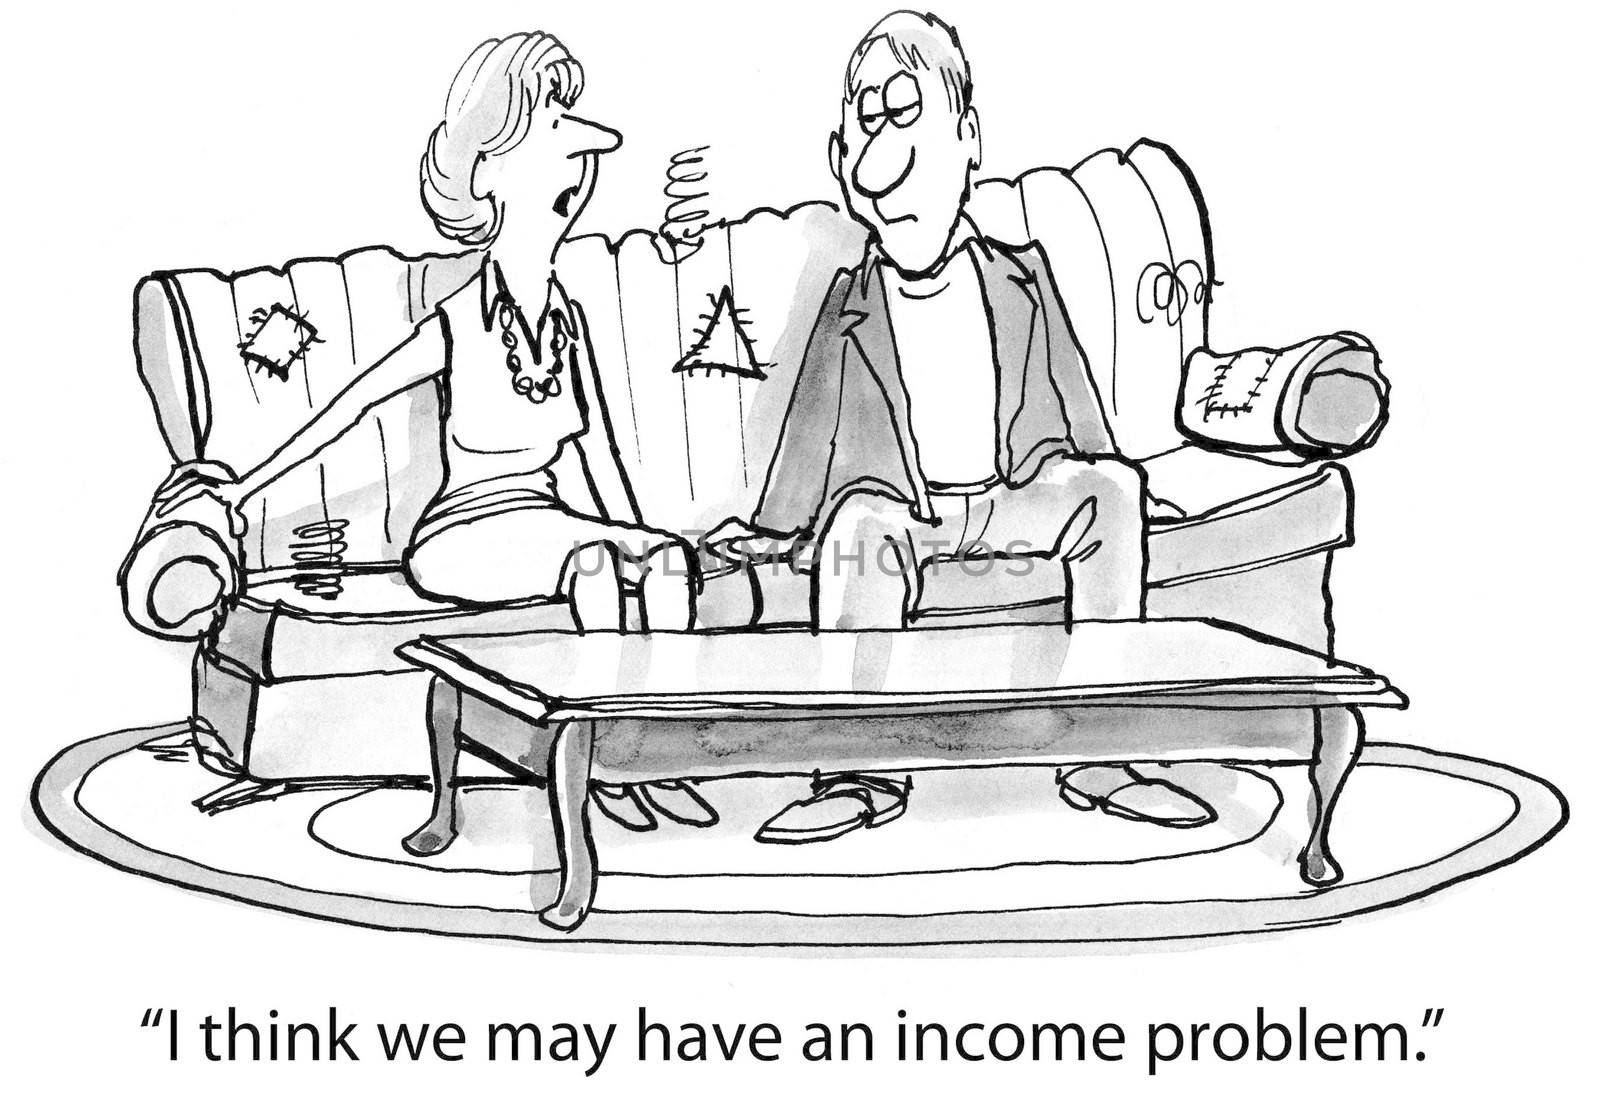 "I think we may have an income problem."